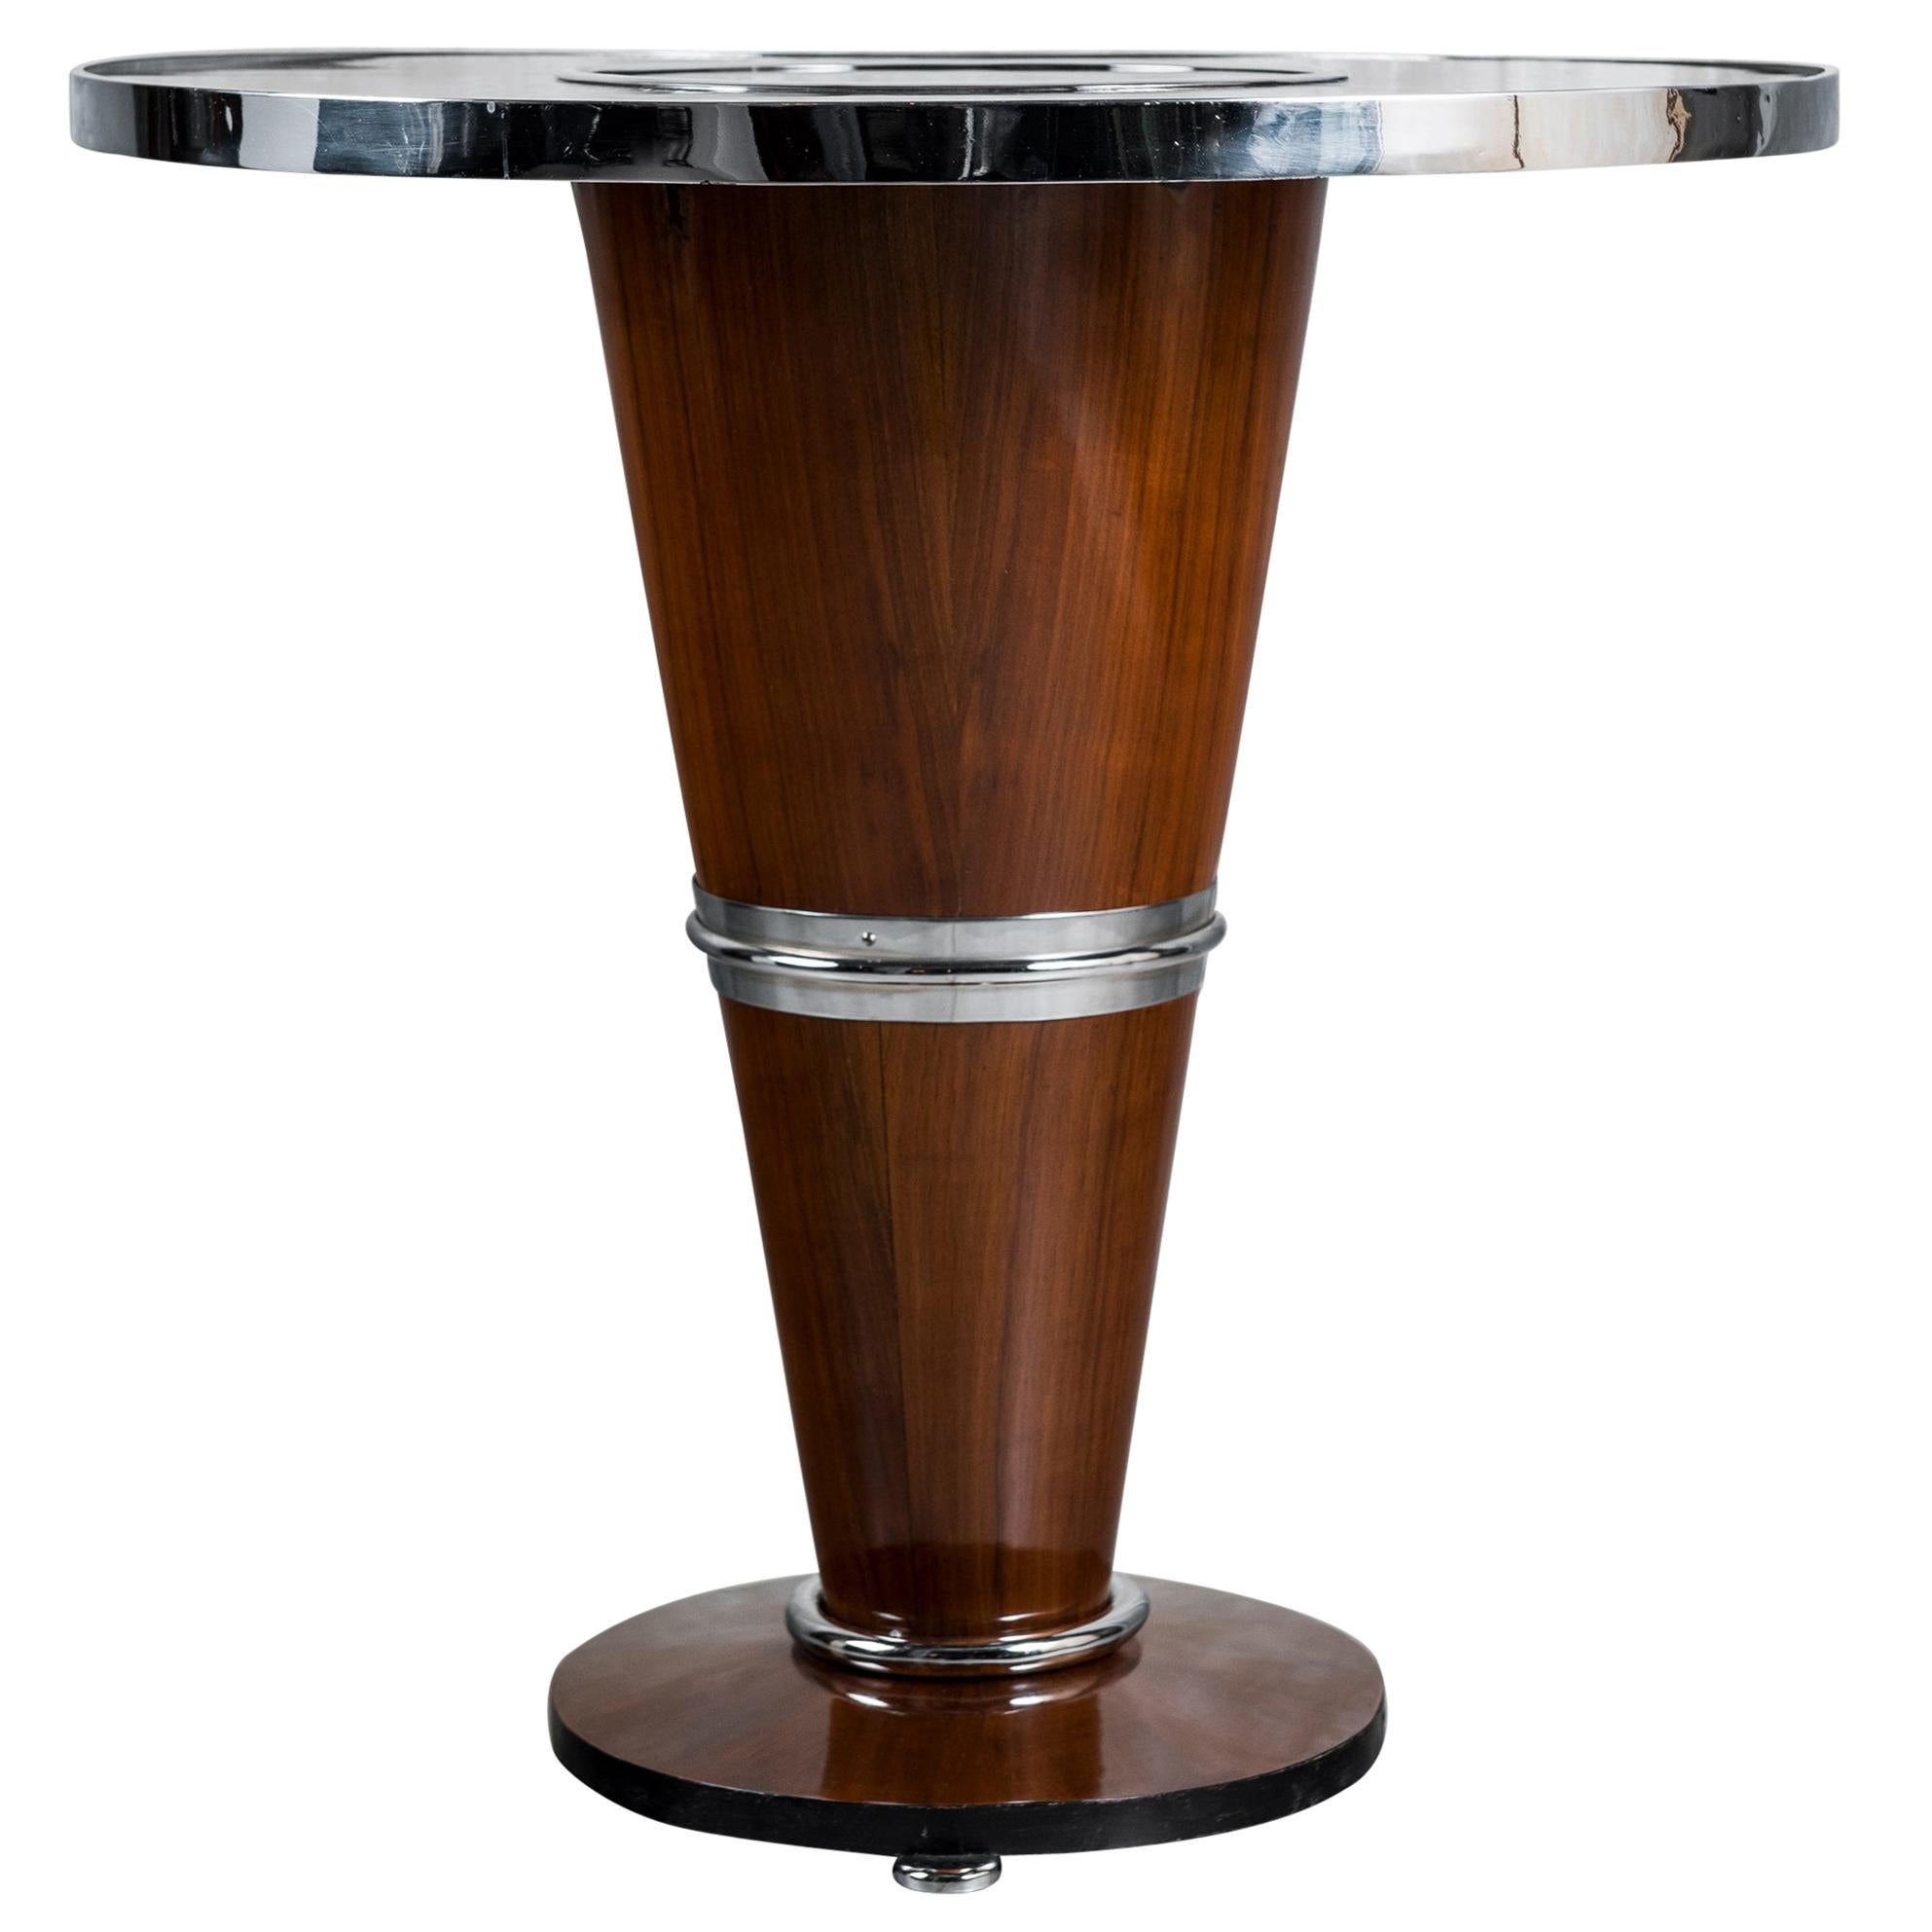 Wood, Chrome and Glass Table, Art Deco Period, France, circa 1930-1940